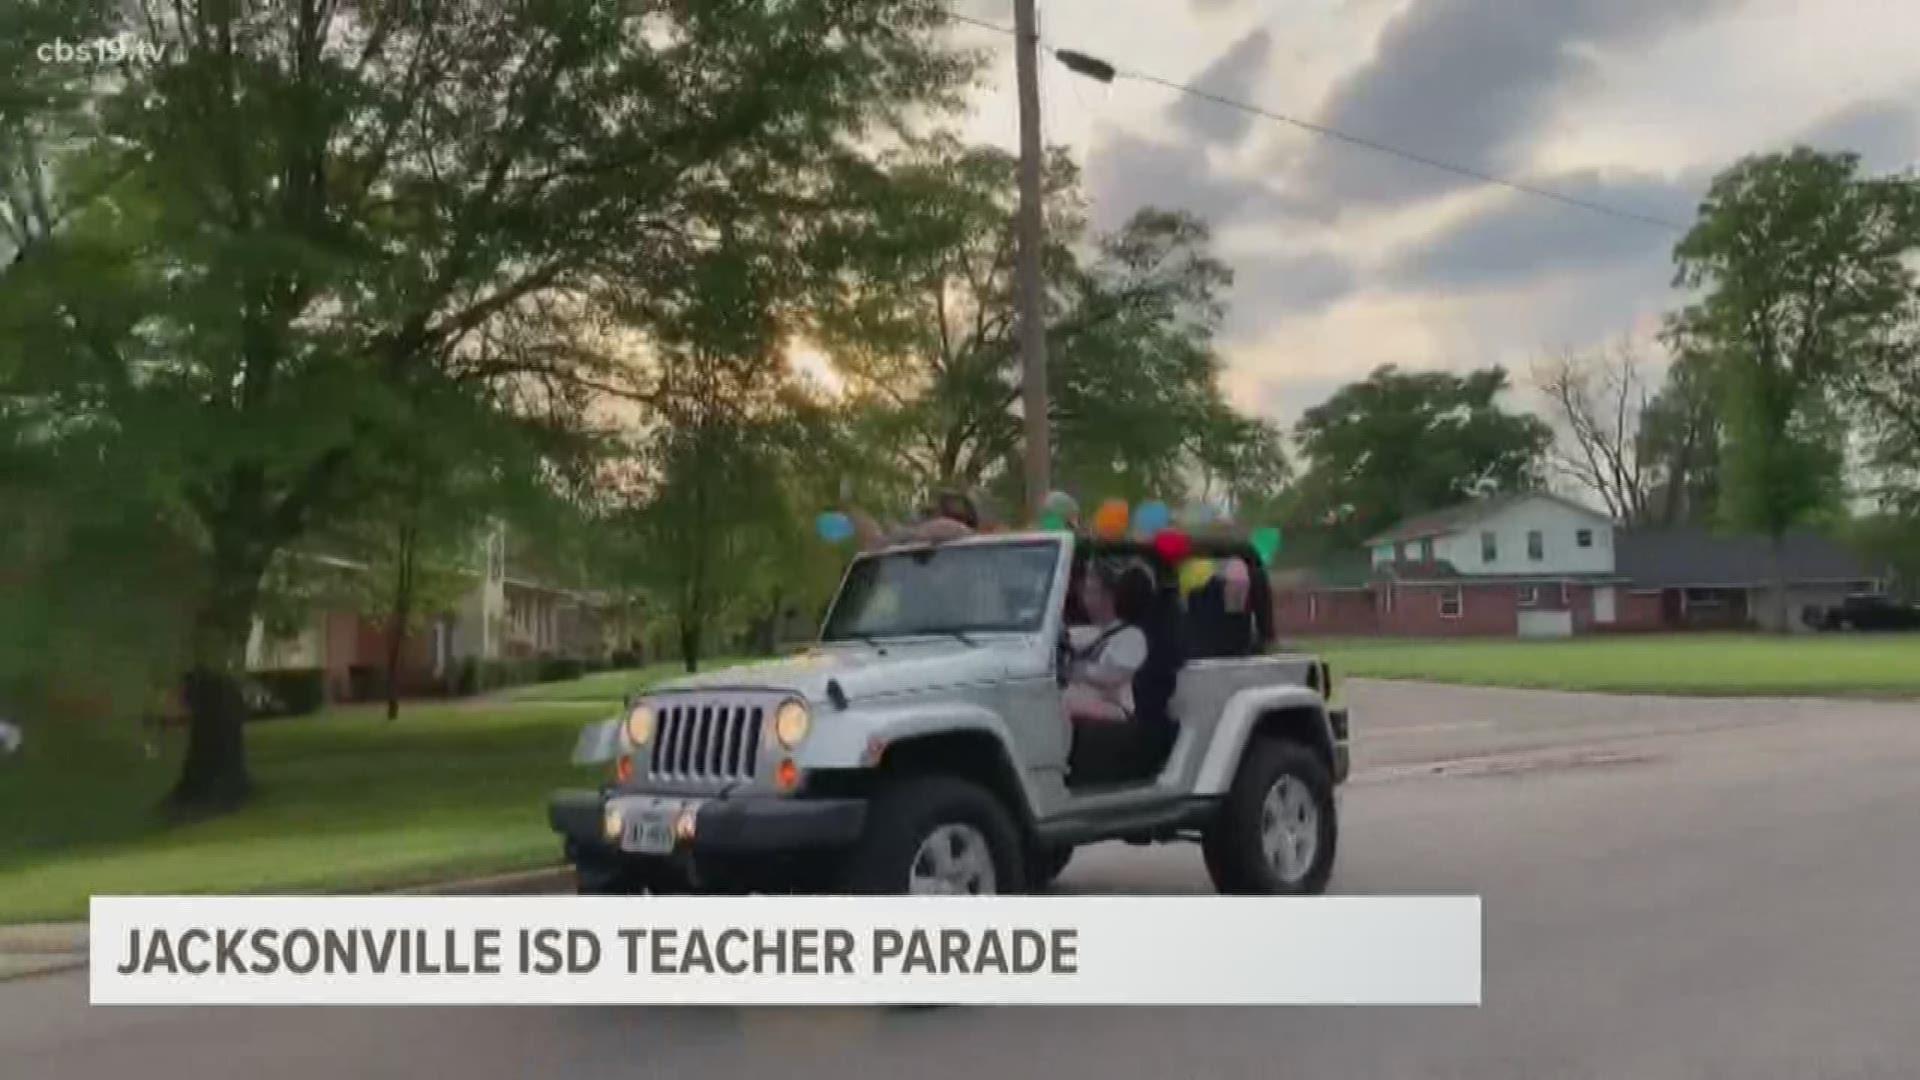 Jacksonville ISD held a parade for students who are missing their teachers during COVID-19 pandemic.